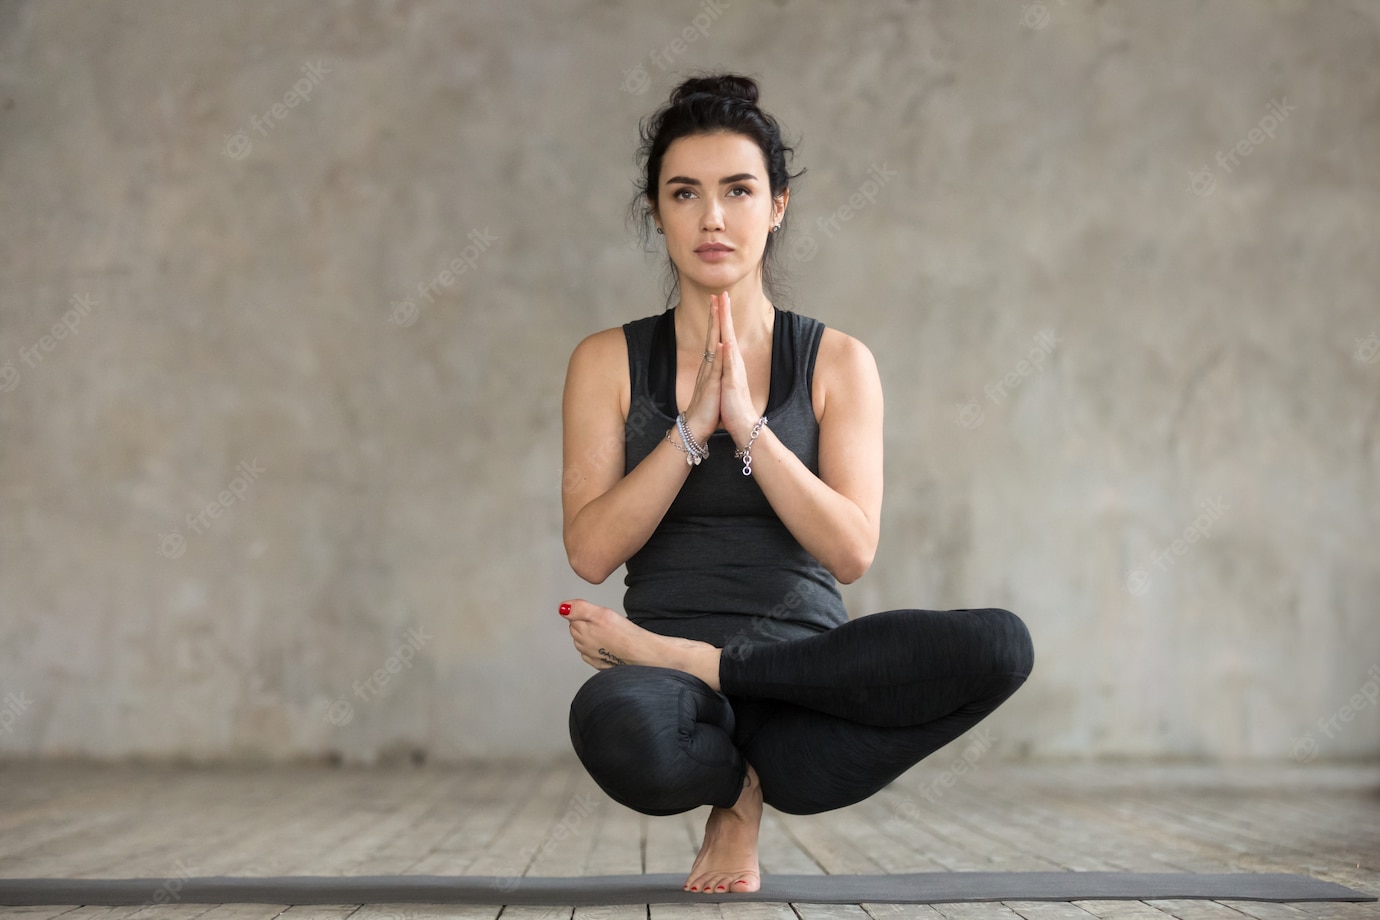 A Yoga Home Personal Trainer For Managing Your Health, Fitness, And Career - shortkro